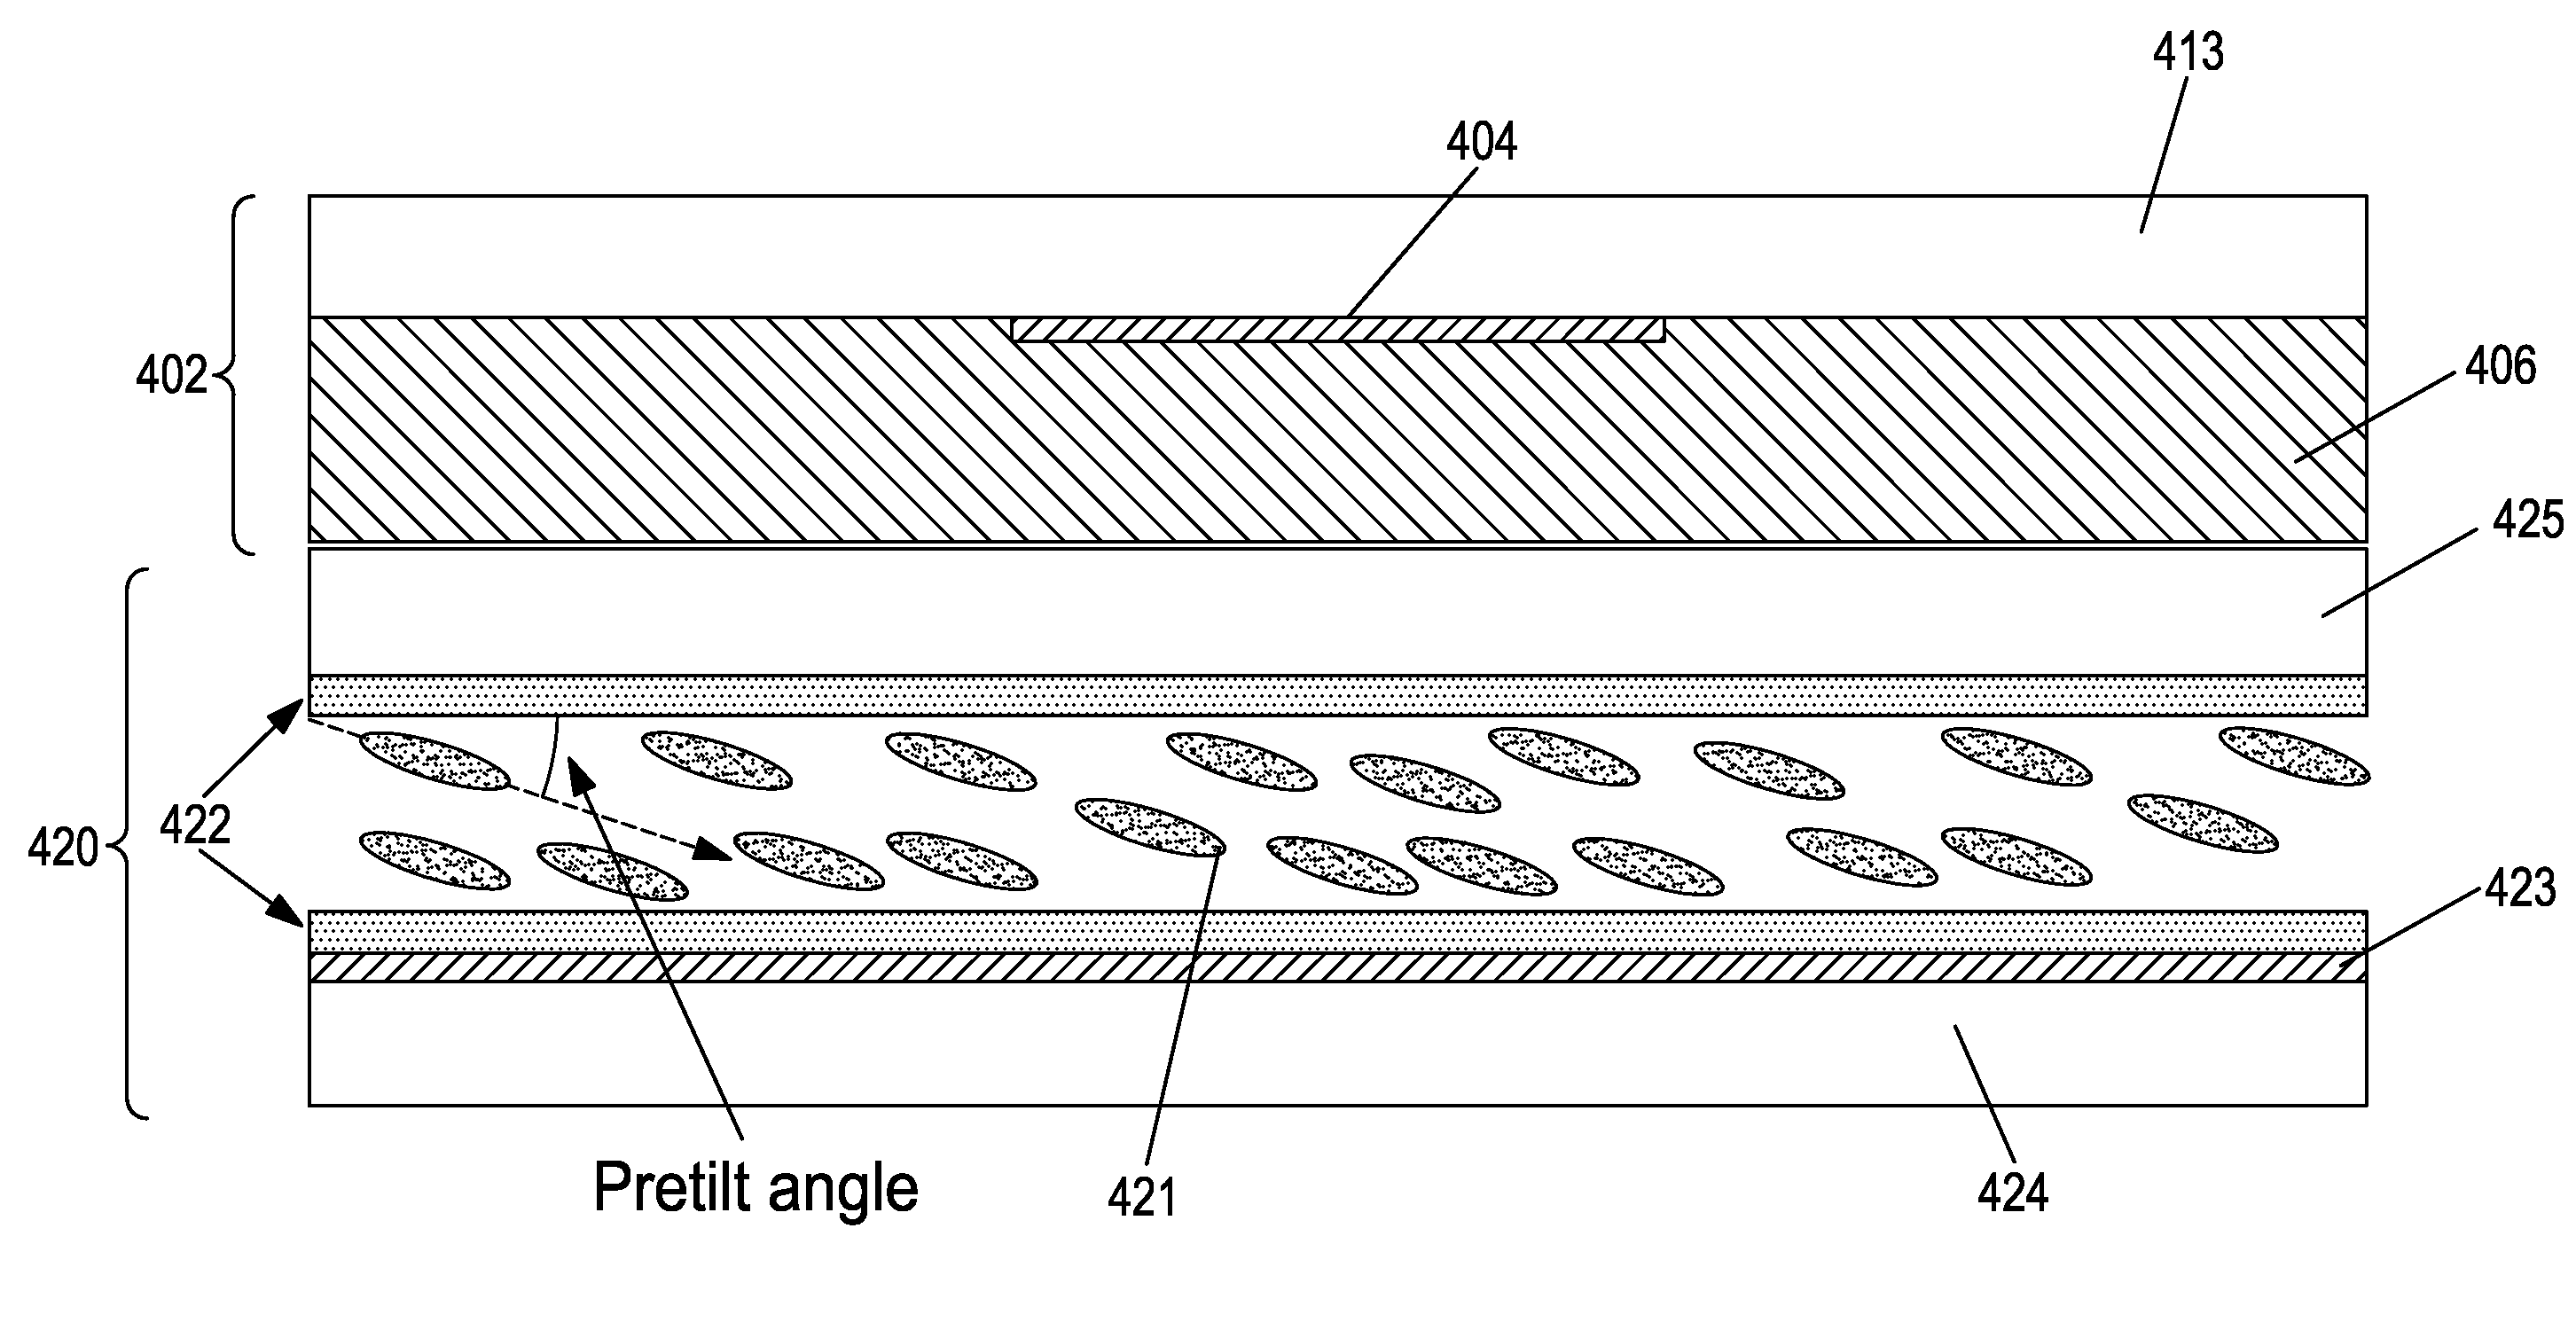 Electro-optical devices using dynamic reconfiguration of effective electrode structures